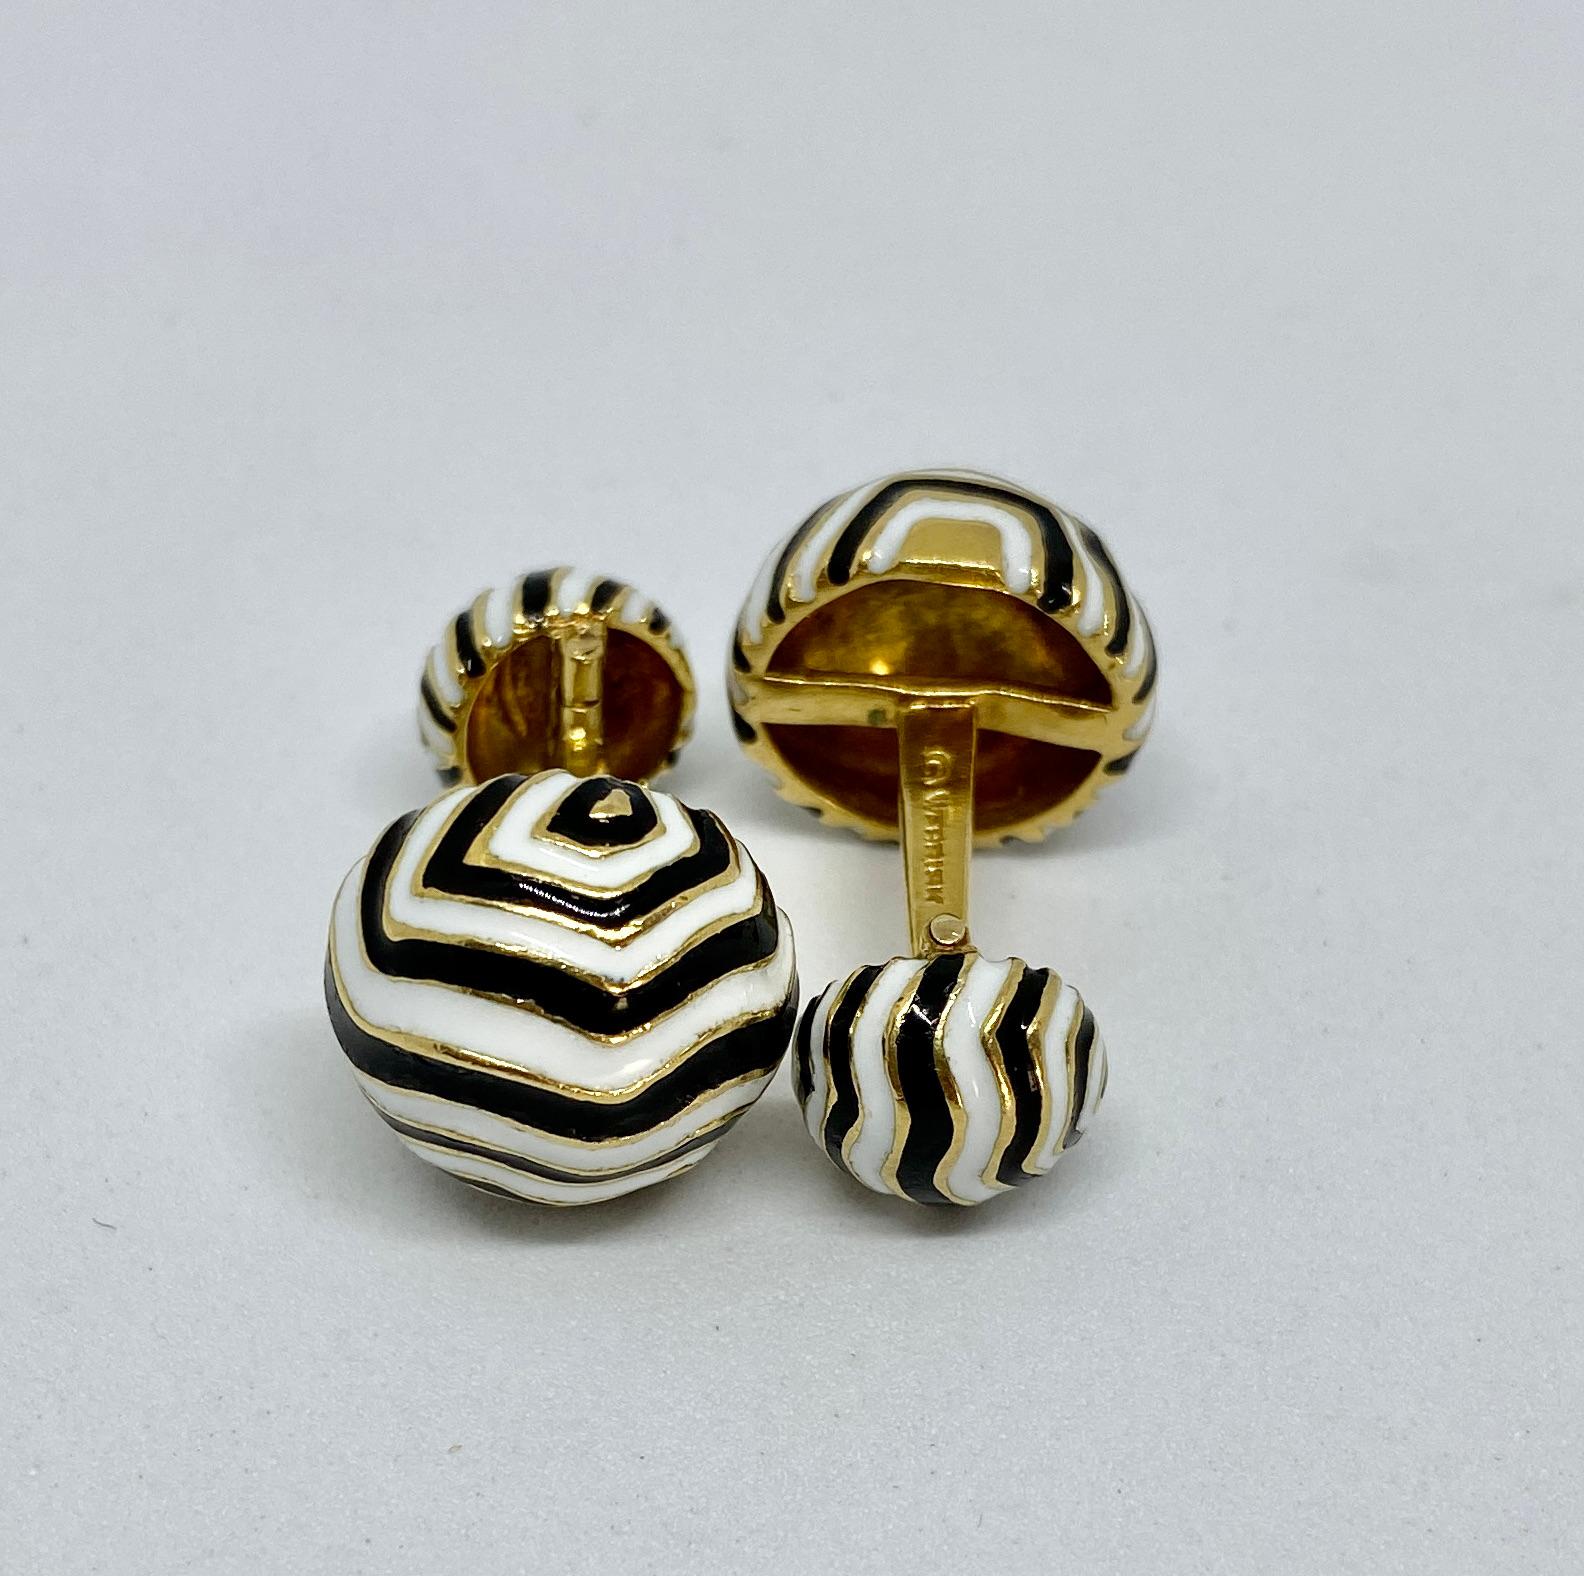 Striking, unmistakable Zebra Stripe cufflinks in 18K yellow gold with black and white enamel by David Webb.

The cufflink faces measure 15.1mm in diameter, while the hinged backs measure 10.2mm in diameter. Together the cufflinks weigh a very